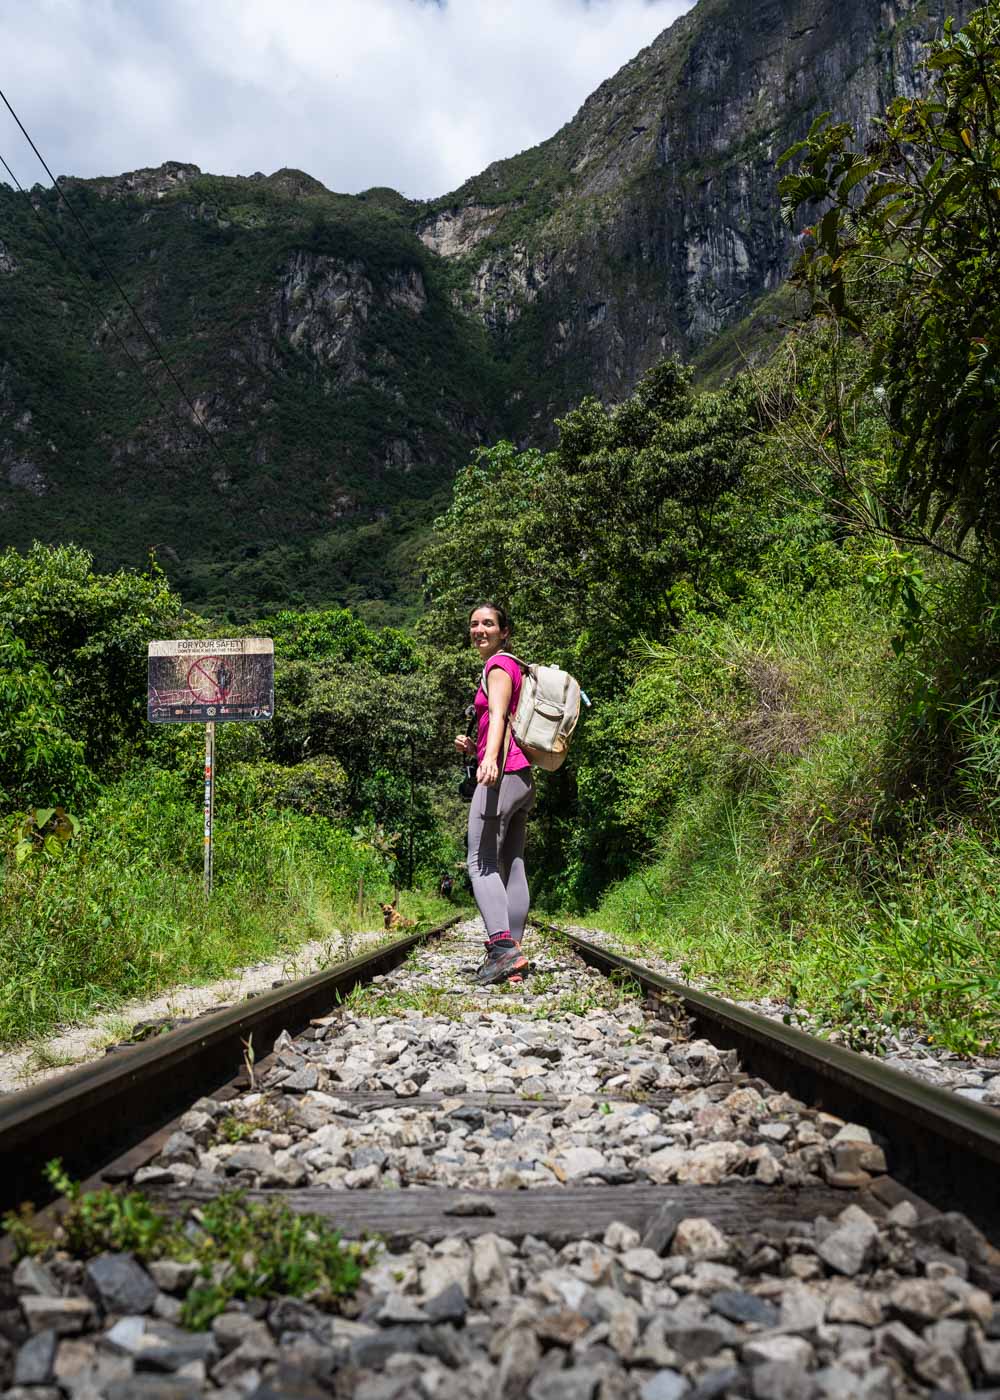 Sara in hiking gear and a backpack posing on a train track surrounded by trees, mountains and a run-down sign.